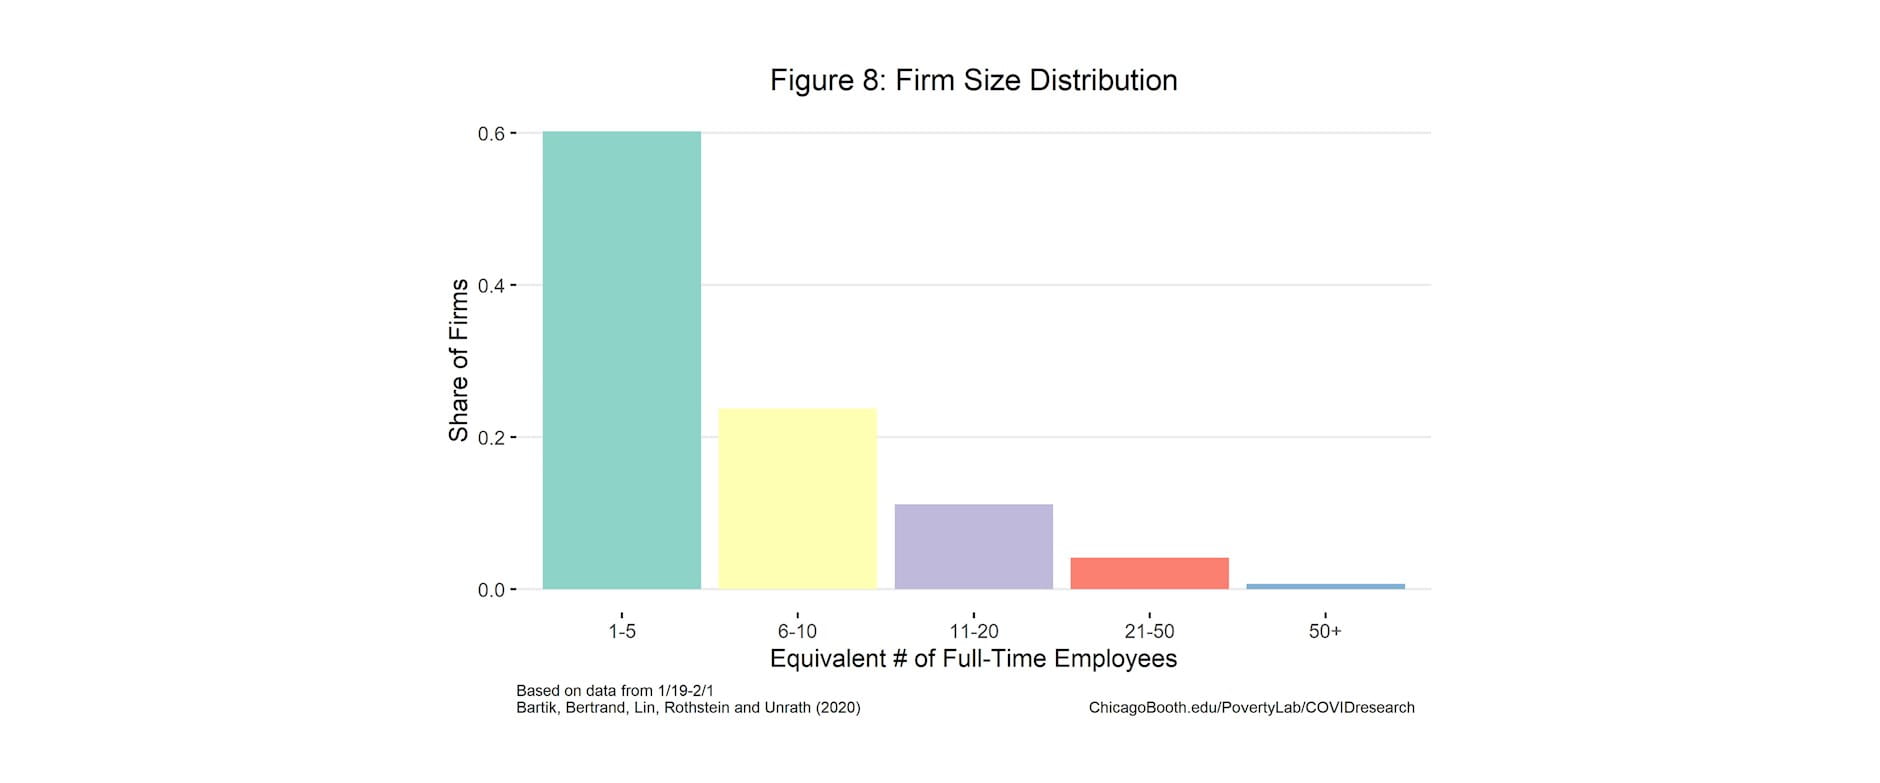 Figure 8: almost all homebase firms have 50 full-time equivalent employees or less